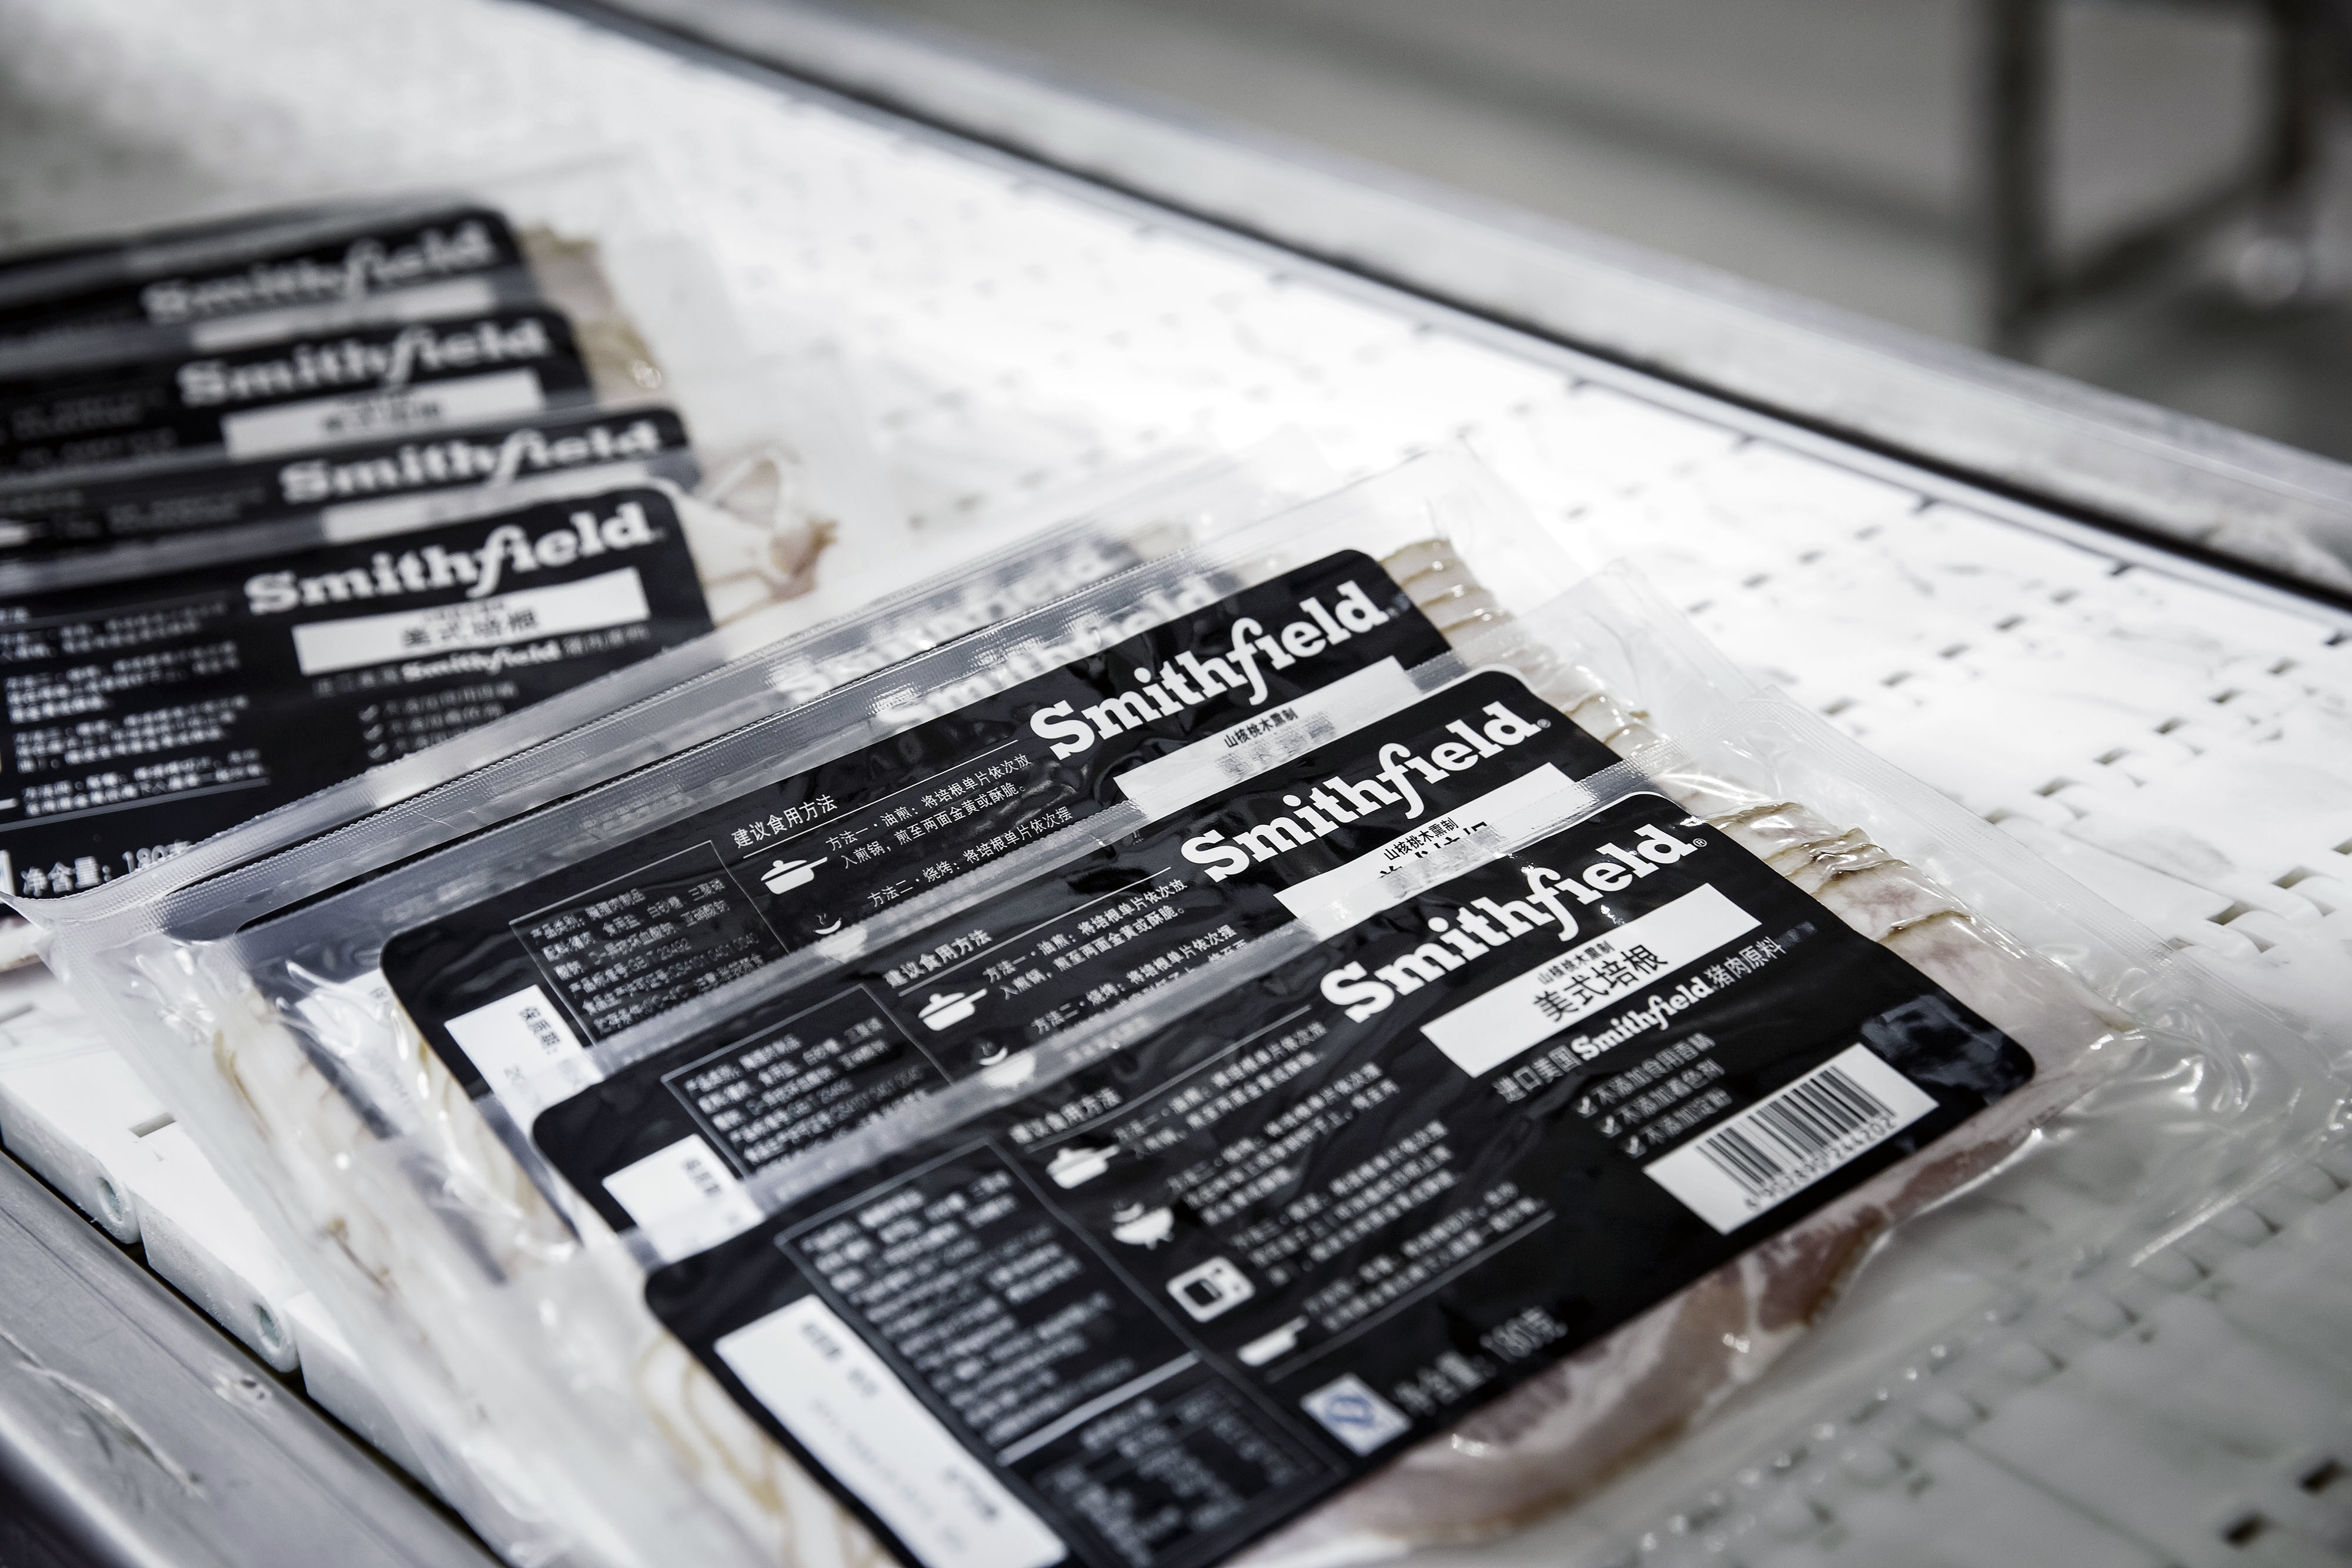 Smithfield owner’s profits boosted by improved U.S. pork business